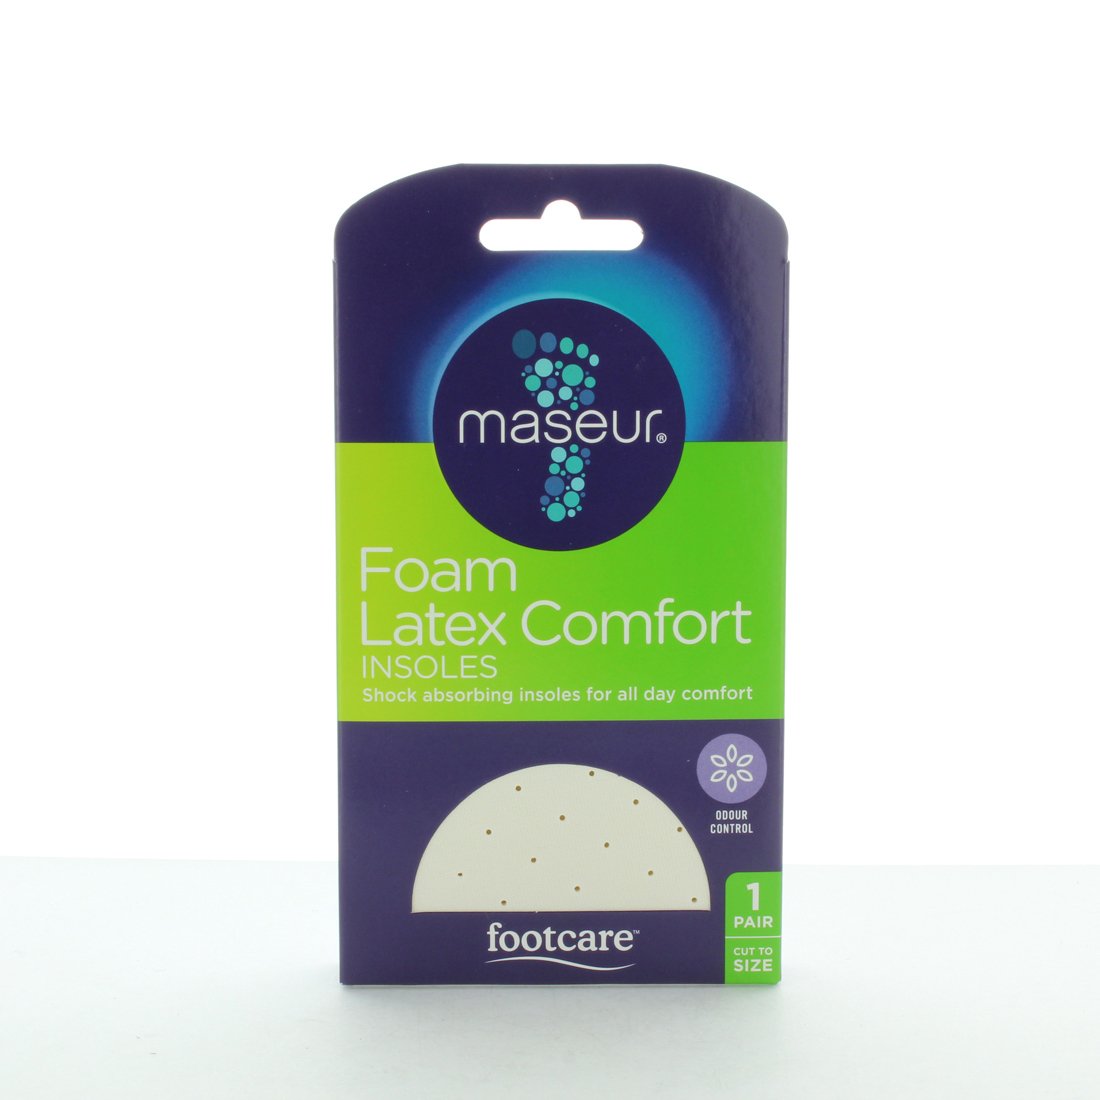 FOAM LATEXT COMFORT INSOLE by FOOTCARE - iShoes - Accessories, Accessories: Shoe Care - SHOECARE-UNISEX